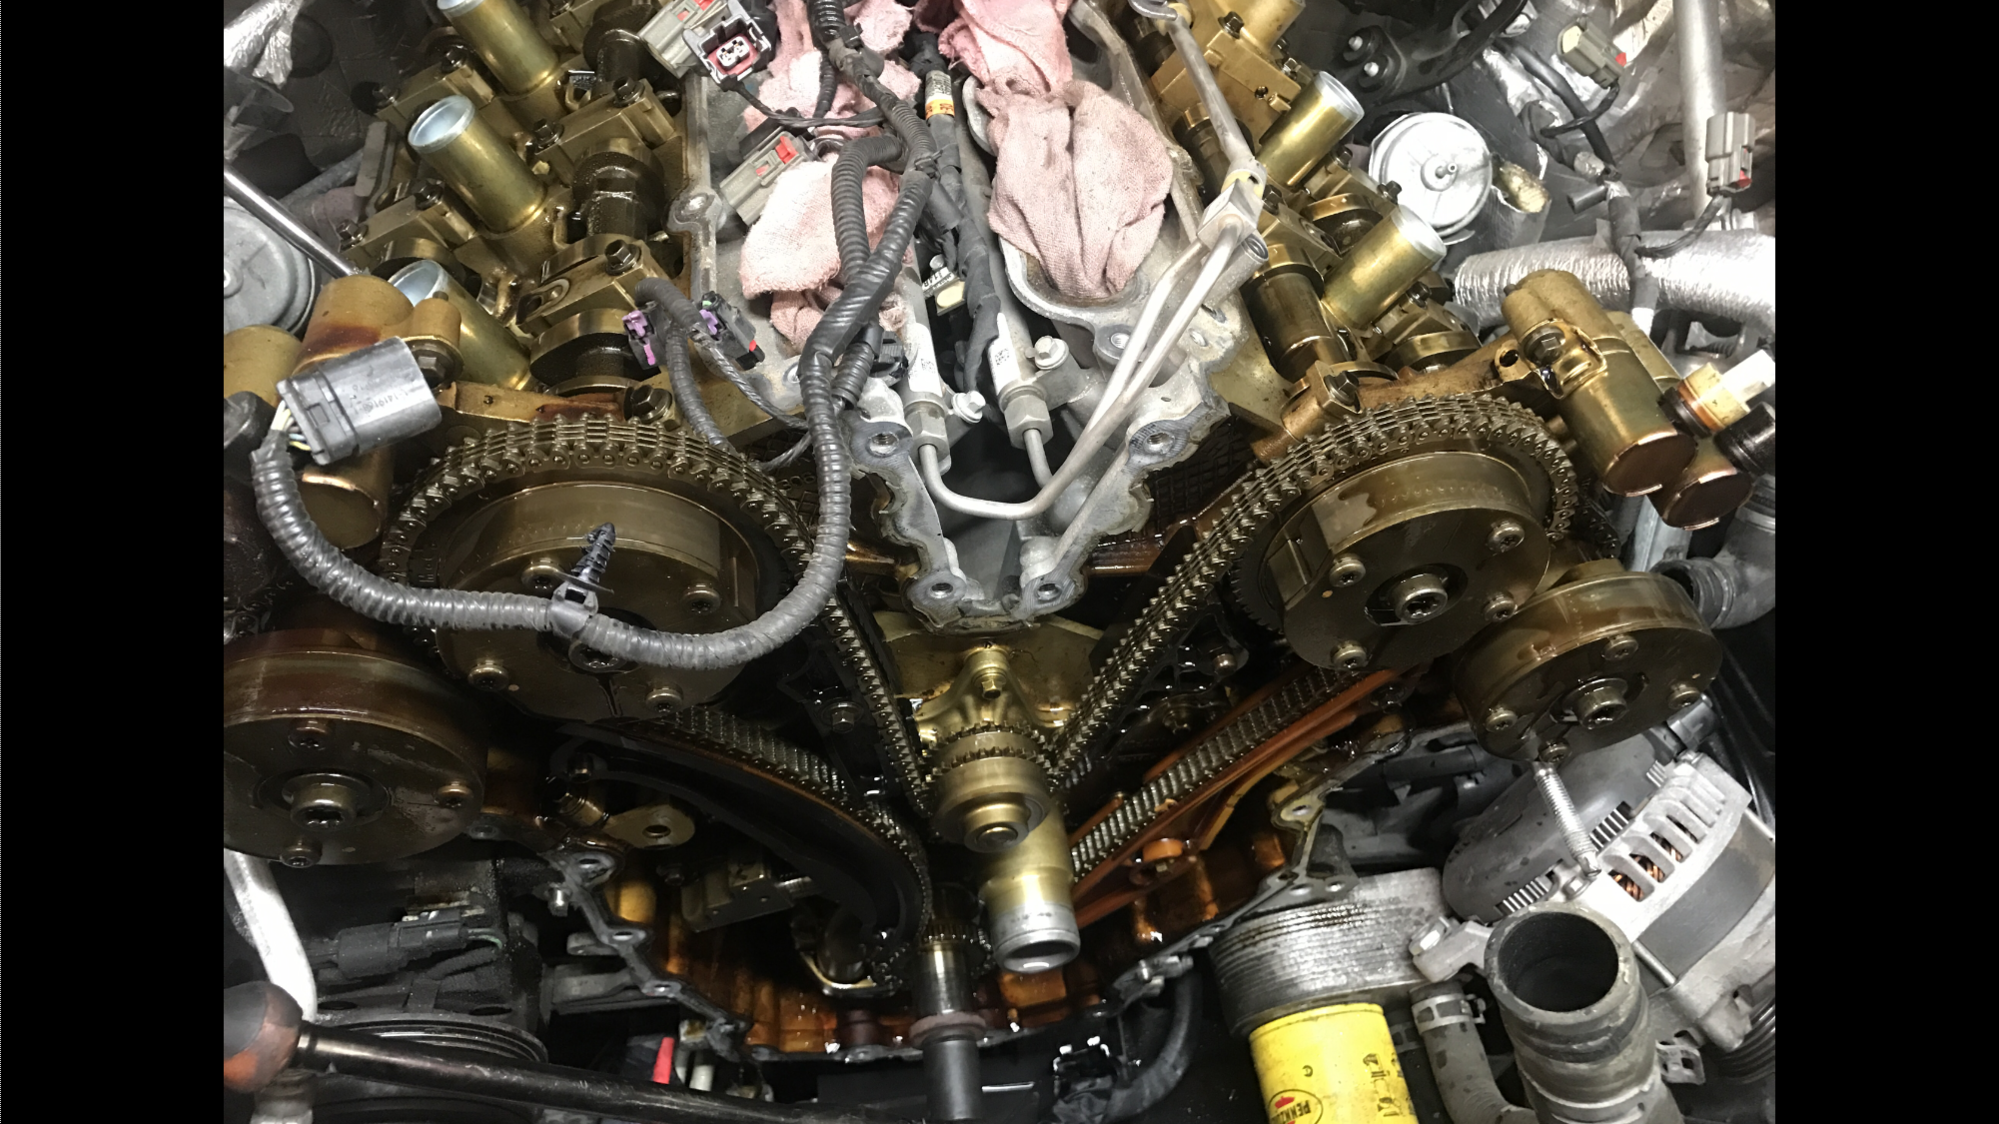 timing chain replacement cost f150